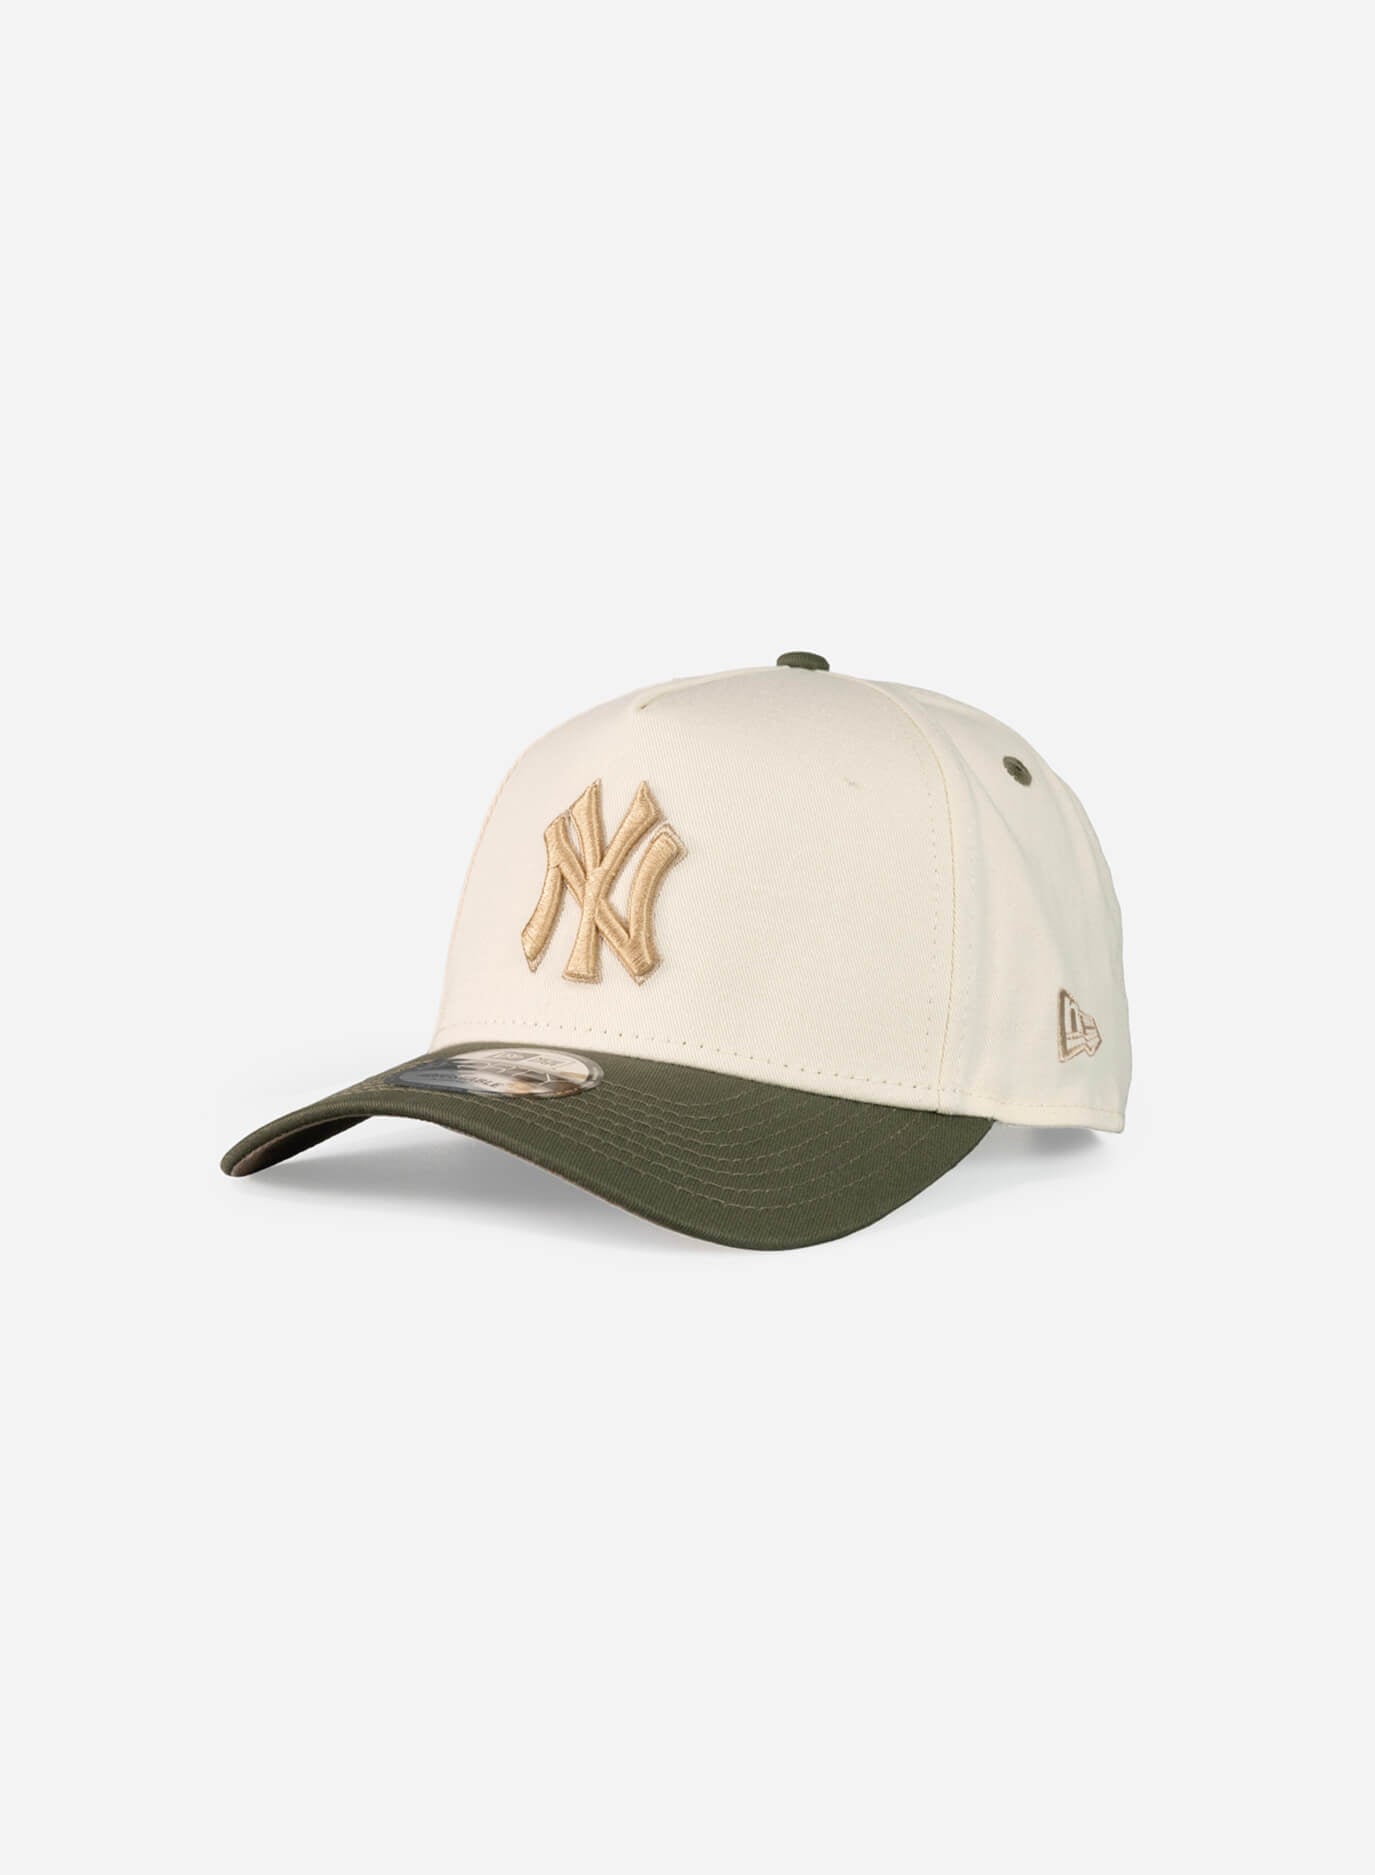 New York Yankees Winecork Olive 9Forty A-Frame